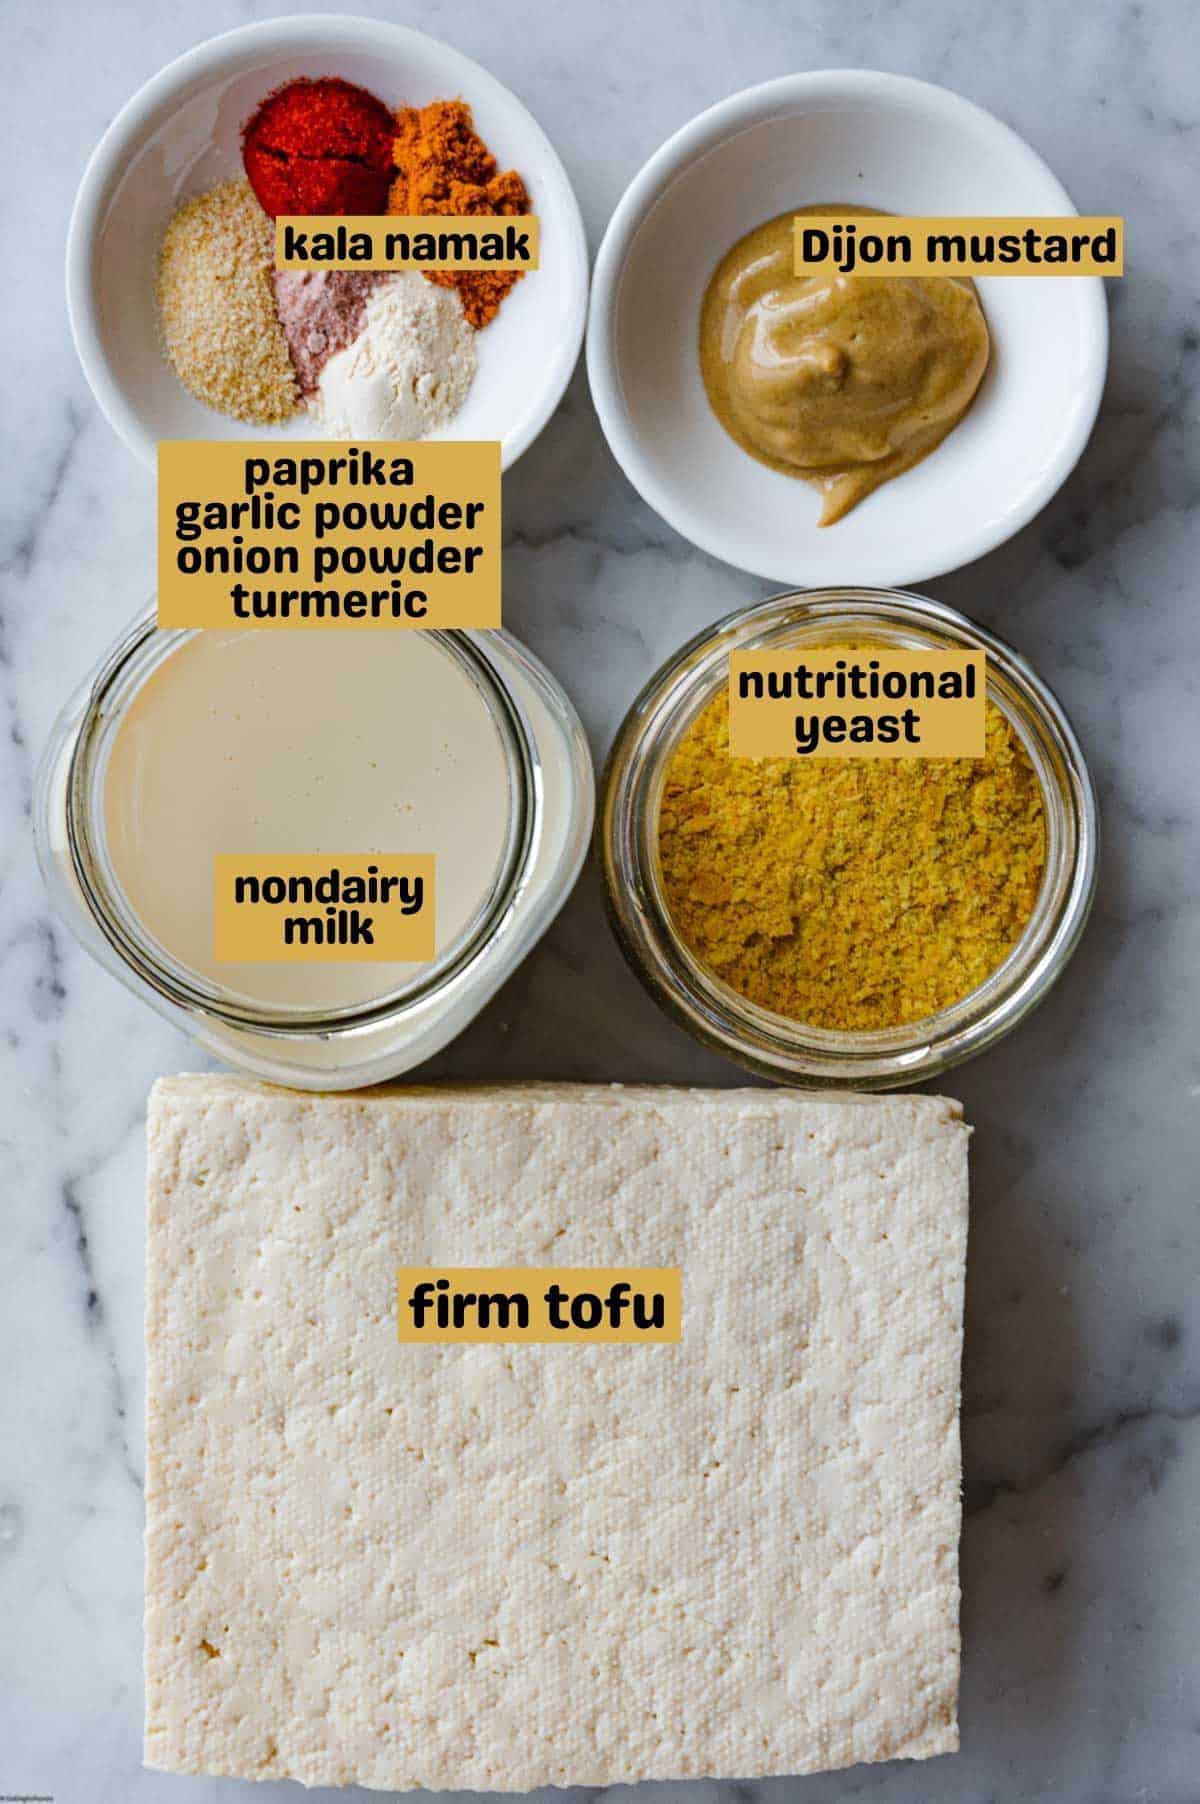 Firm tofu, Dijon mustard in a white bowl, nondairy milk and nutritional yeast in glass jars, and paprika, garlic powder, onion powder, turmeric, and kala namak in a white bowl. On a white marble backdrop.